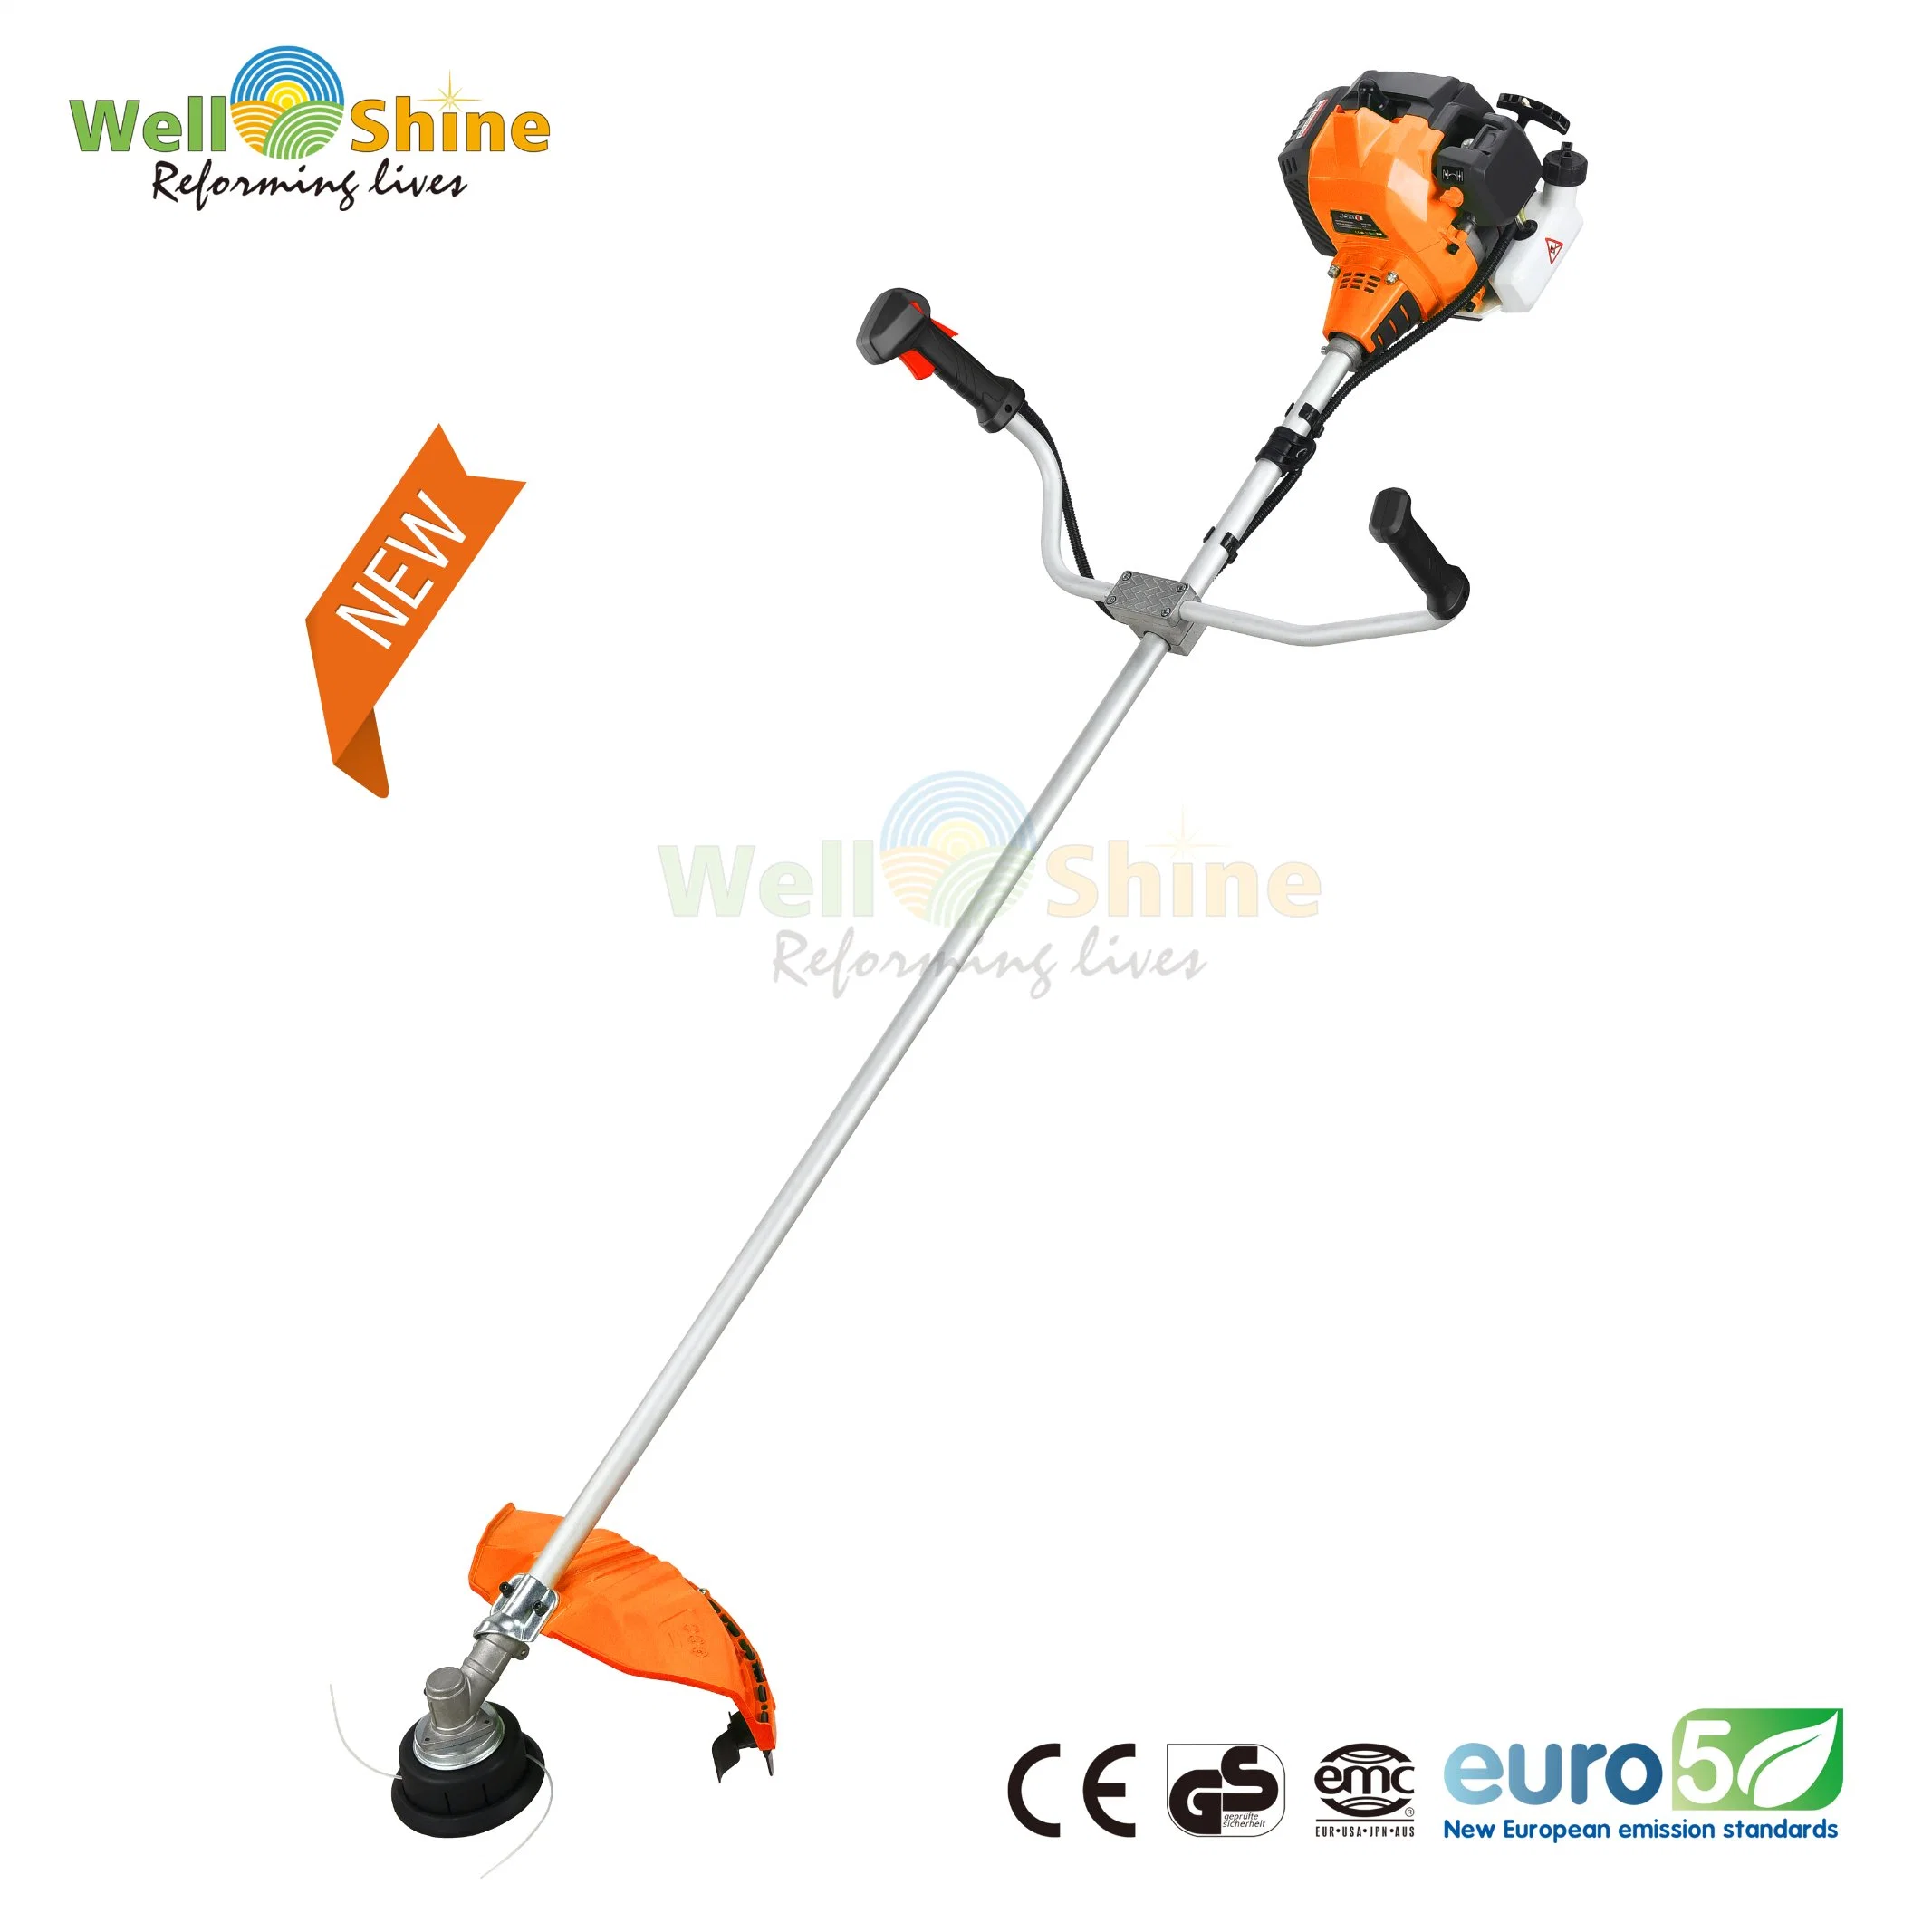 New! 52cc Grass Trimmer and Petrol Brush Cutter with Bike Handle